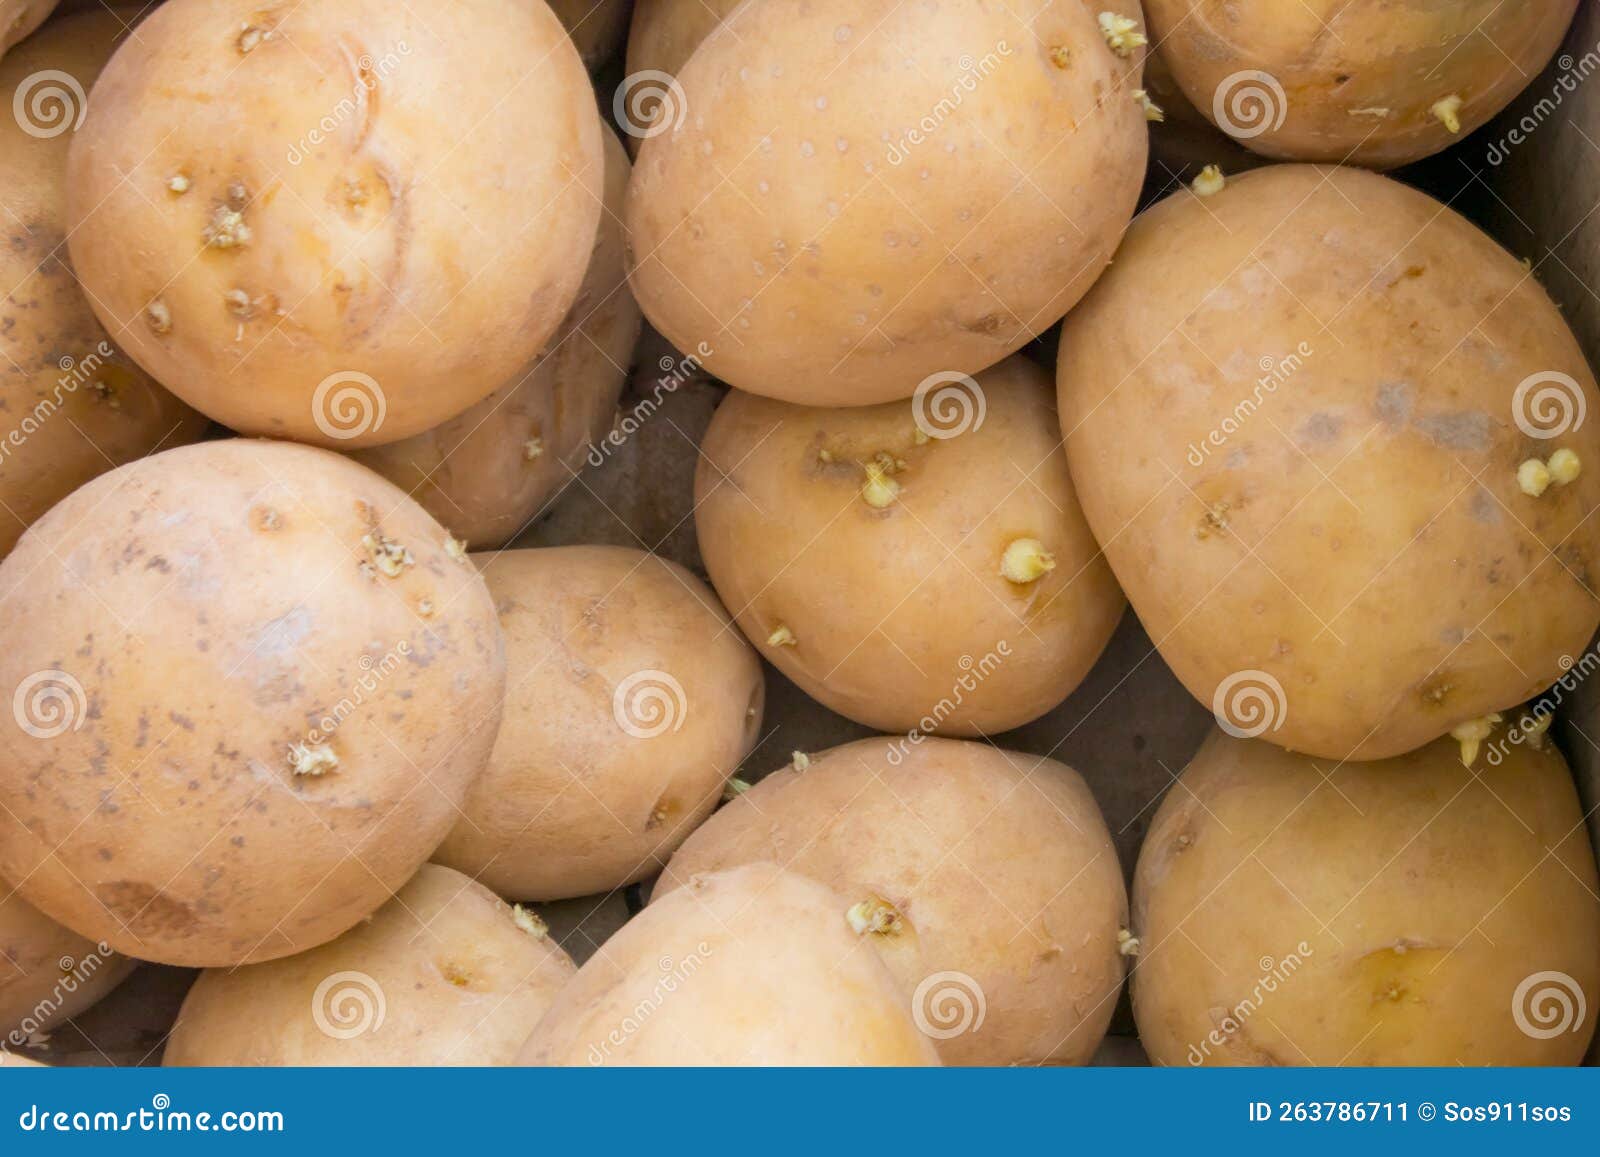 large potato tubers sprouted close-up with sprouts